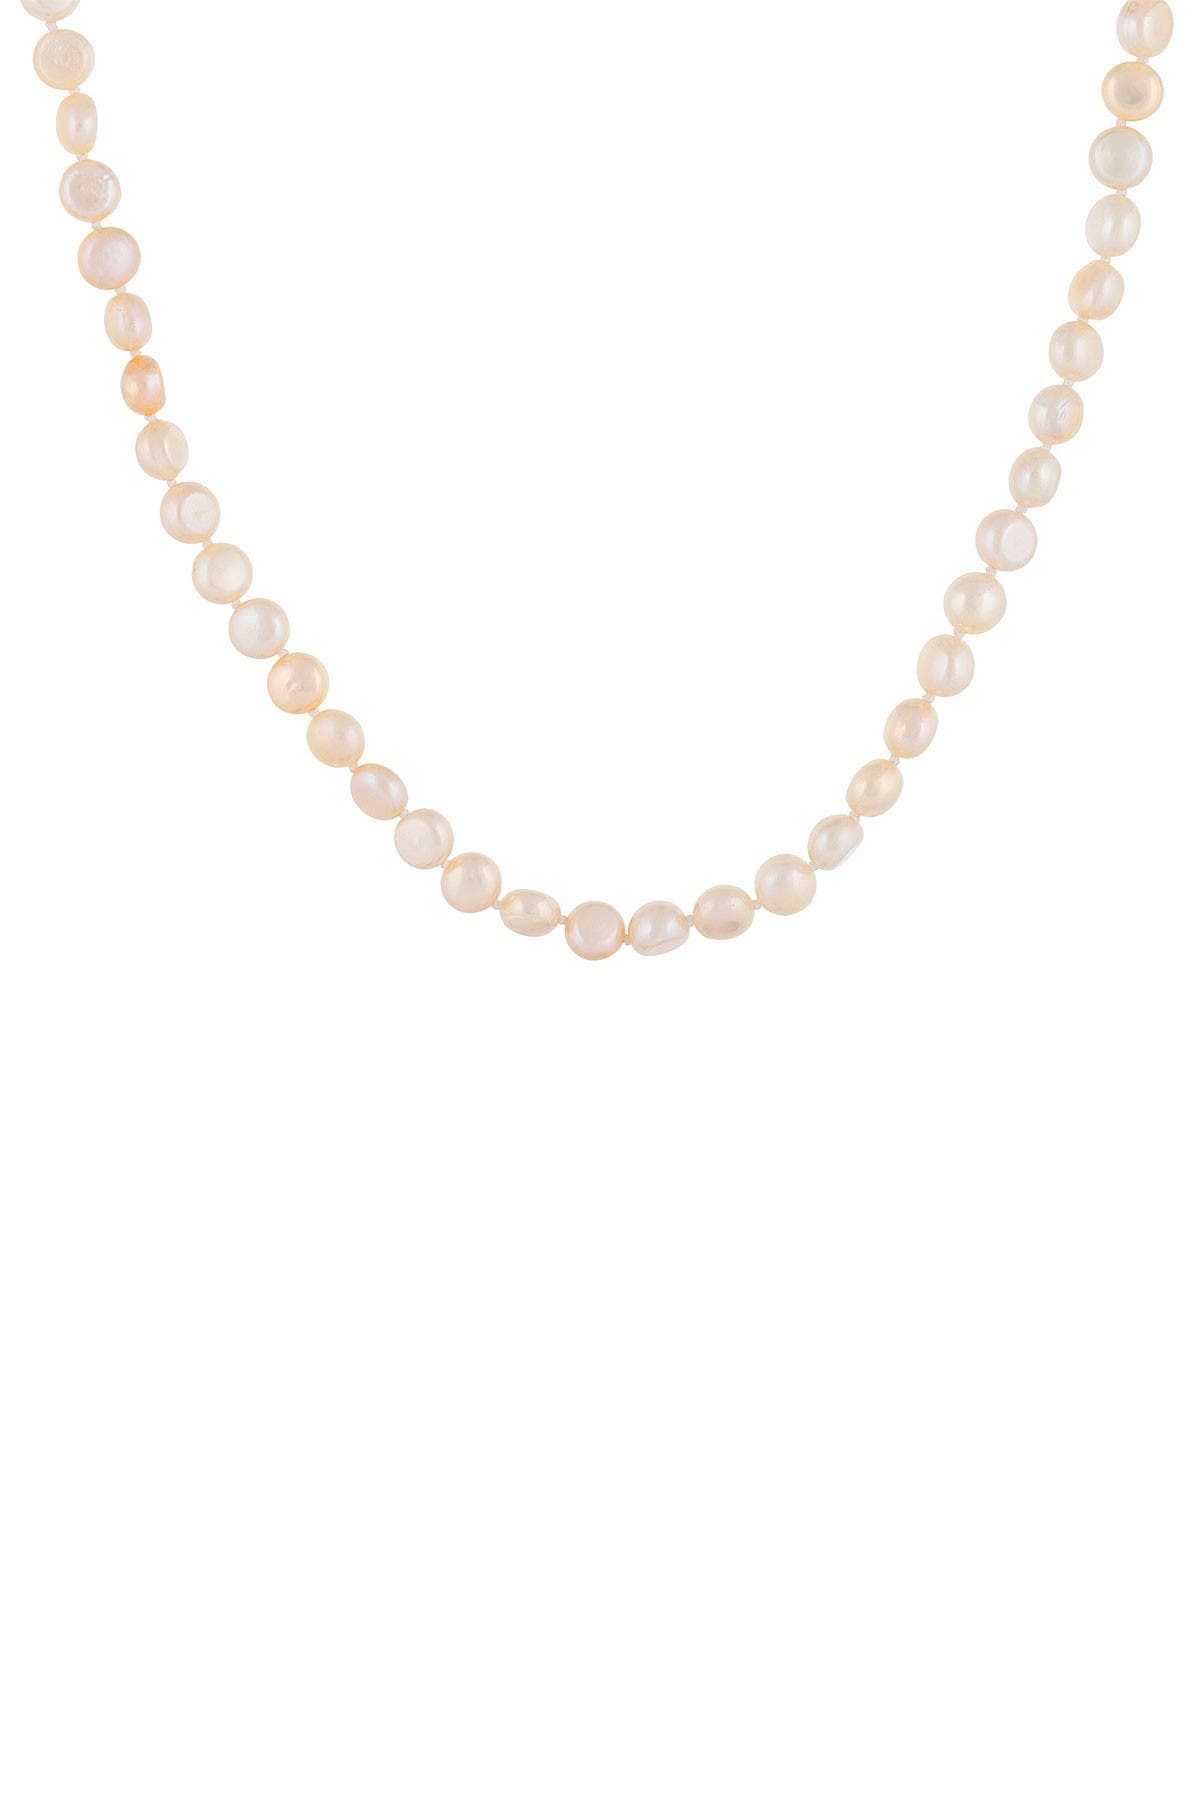 Splendid Pearls Sterling Silver 6-7mm Natural Pink Button Pearl Necklace